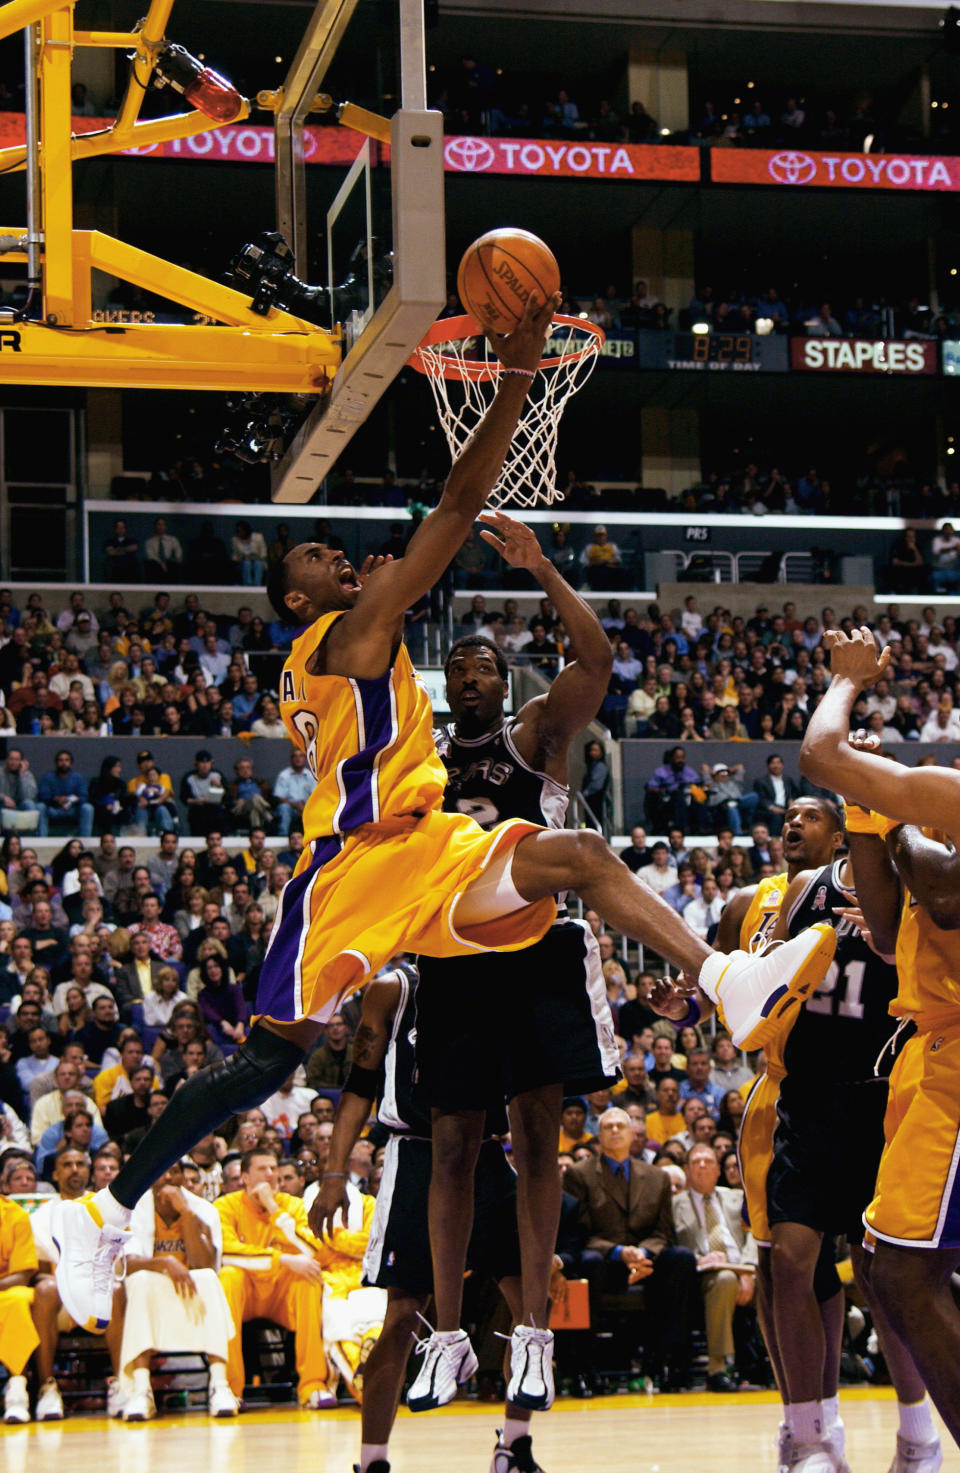 Bryant goes up-and-under for the layup against&nbsp;the San Antonio Spurs during Game 2&nbsp;of the Western Conference Semifinals on May 7, 2002.